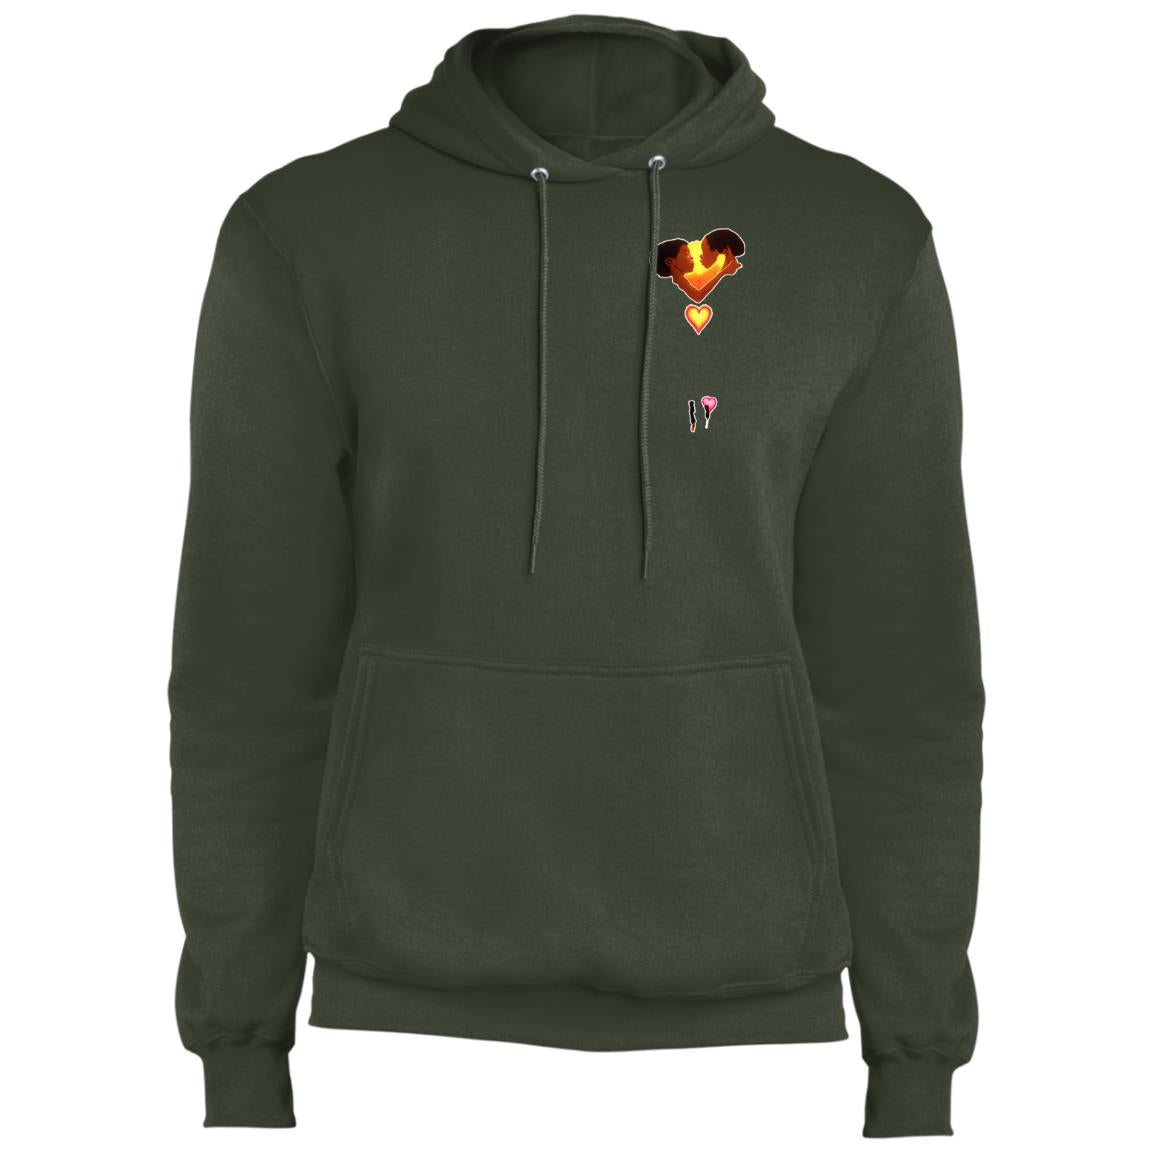 Reyounighted Pullover Hoodie